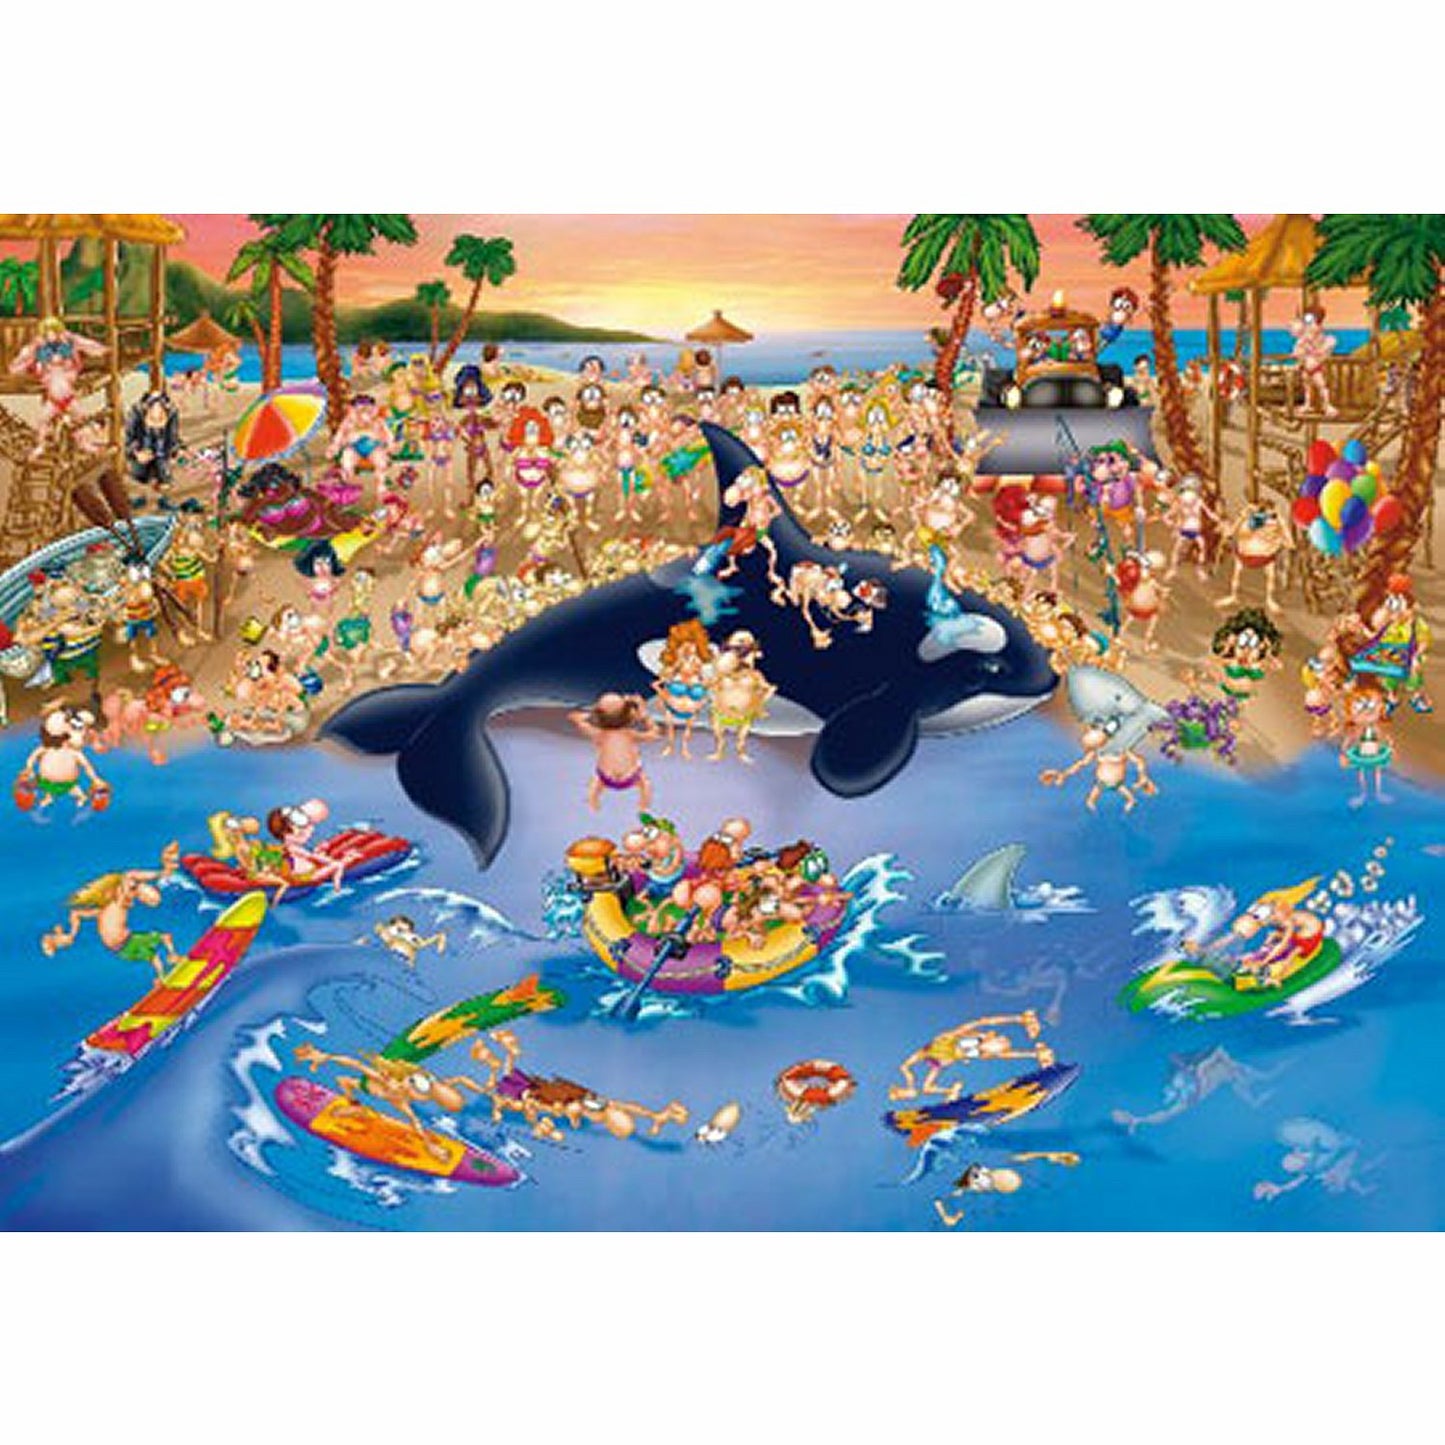 Dtoys - Cartoon Collection : Trafic Jam at the Beach - 1000 Piece Jigsaw Puzzle